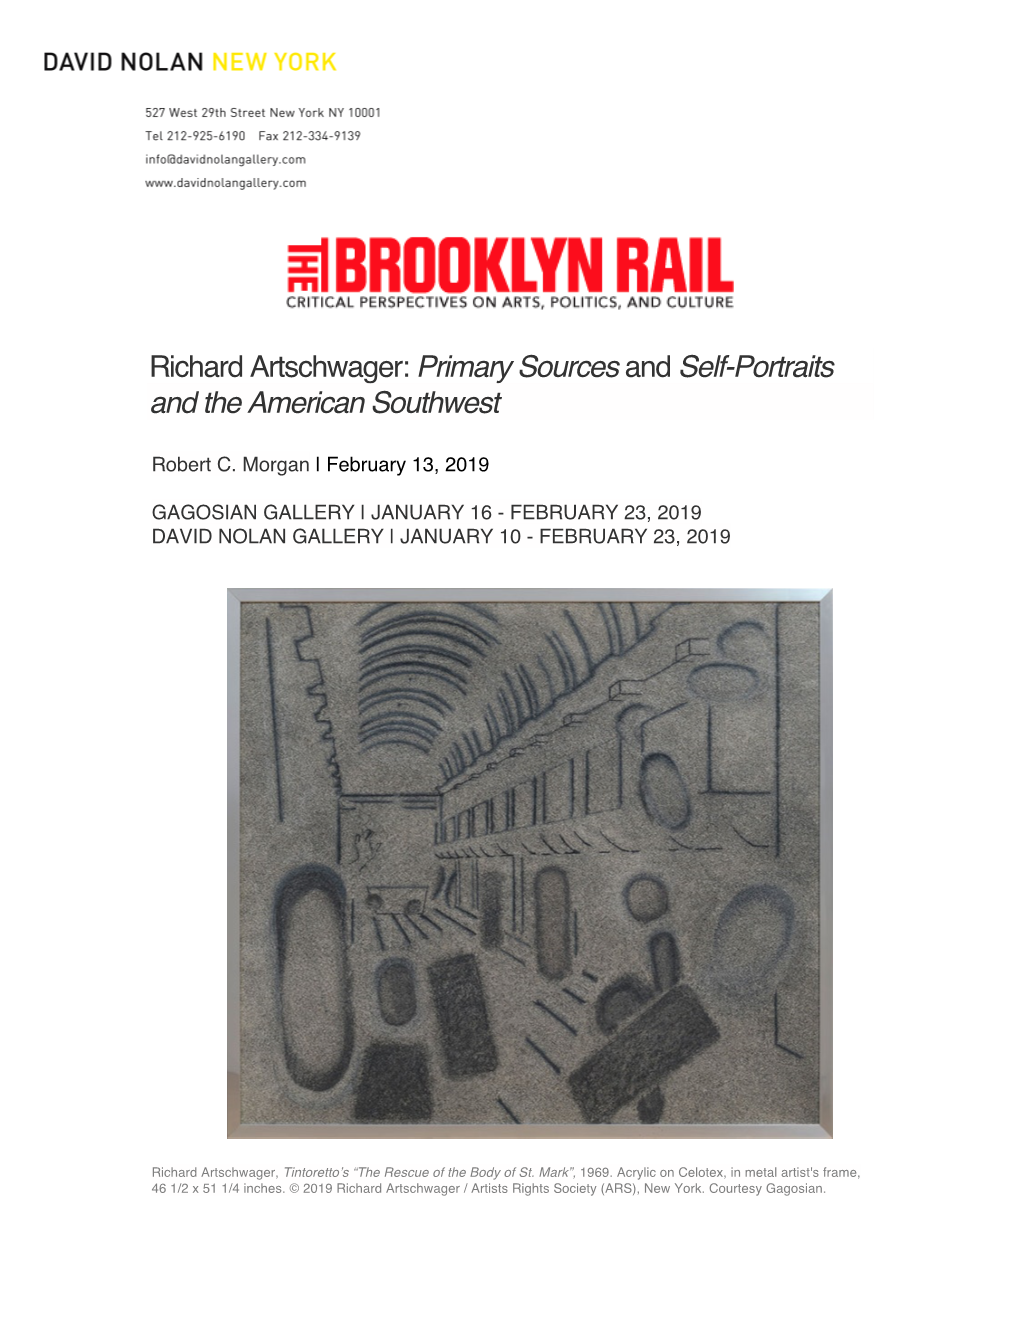 Richard Artschwager: Primary Sources and Self-Portraits and the American Southwest